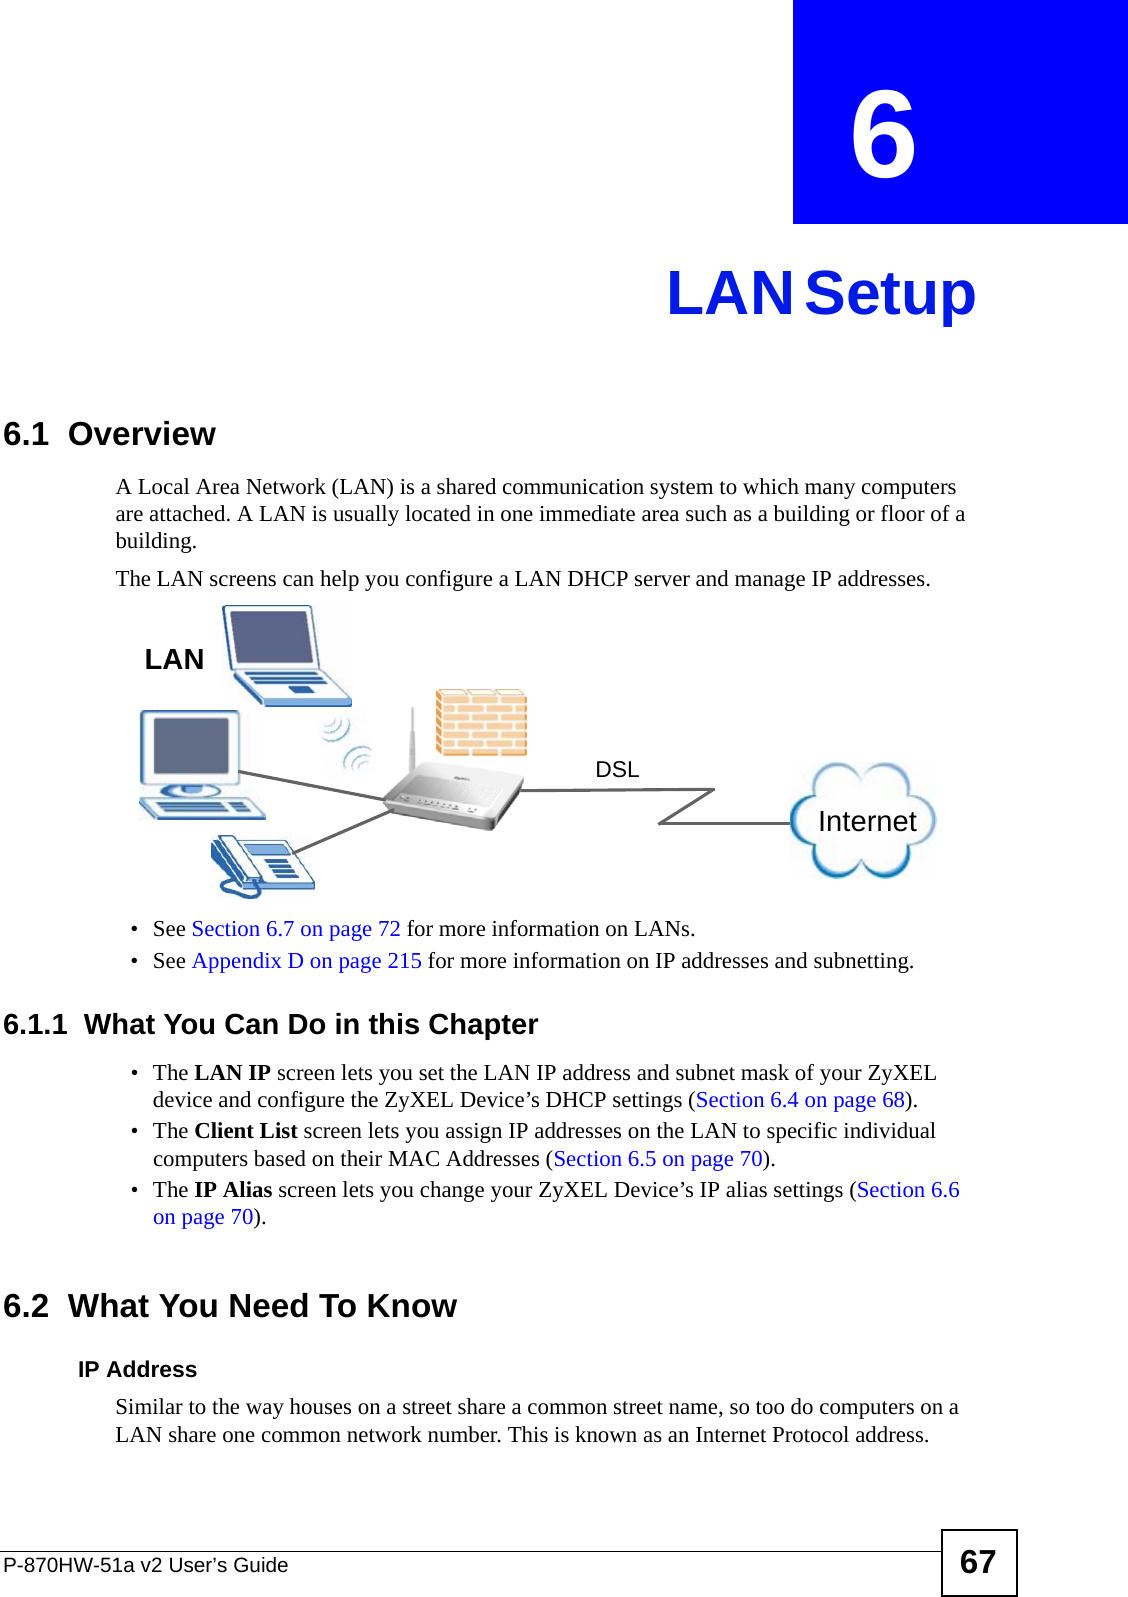 P-870HW-51a v2 User’s Guide 67CHAPTER  6 LAN Setup6.1  Overview  A Local Area Network (LAN) is a shared communication system to which many computers are attached. A LAN is usually located in one immediate area such as a building or floor of a building.The LAN screens can help you configure a LAN DHCP server and manage IP addresses.• See Section 6.7 on page 72 for more information on LANs.• See Appendix D on page 215 for more information on IP addresses and subnetting.6.1.1  What You Can Do in this Chapter•The LAN IP screen lets you set the LAN IP address and subnet mask of your ZyXEL device and configure the ZyXEL Device’s DHCP settings (Section 6.4 on page 68).•The Client List screen lets you assign IP addresses on the LAN to specific individual computers based on their MAC Addresses (Section 6.5 on page 70). •The IP Alias screen lets you change your ZyXEL Device’s IP alias settings (Section 6.6 on page 70).6.2  What You Need To KnowIP AddressSimilar to the way houses on a street share a common street name, so too do computers on a LAN share one common network number. This is known as an Internet Protocol address.InternetDSLLAN